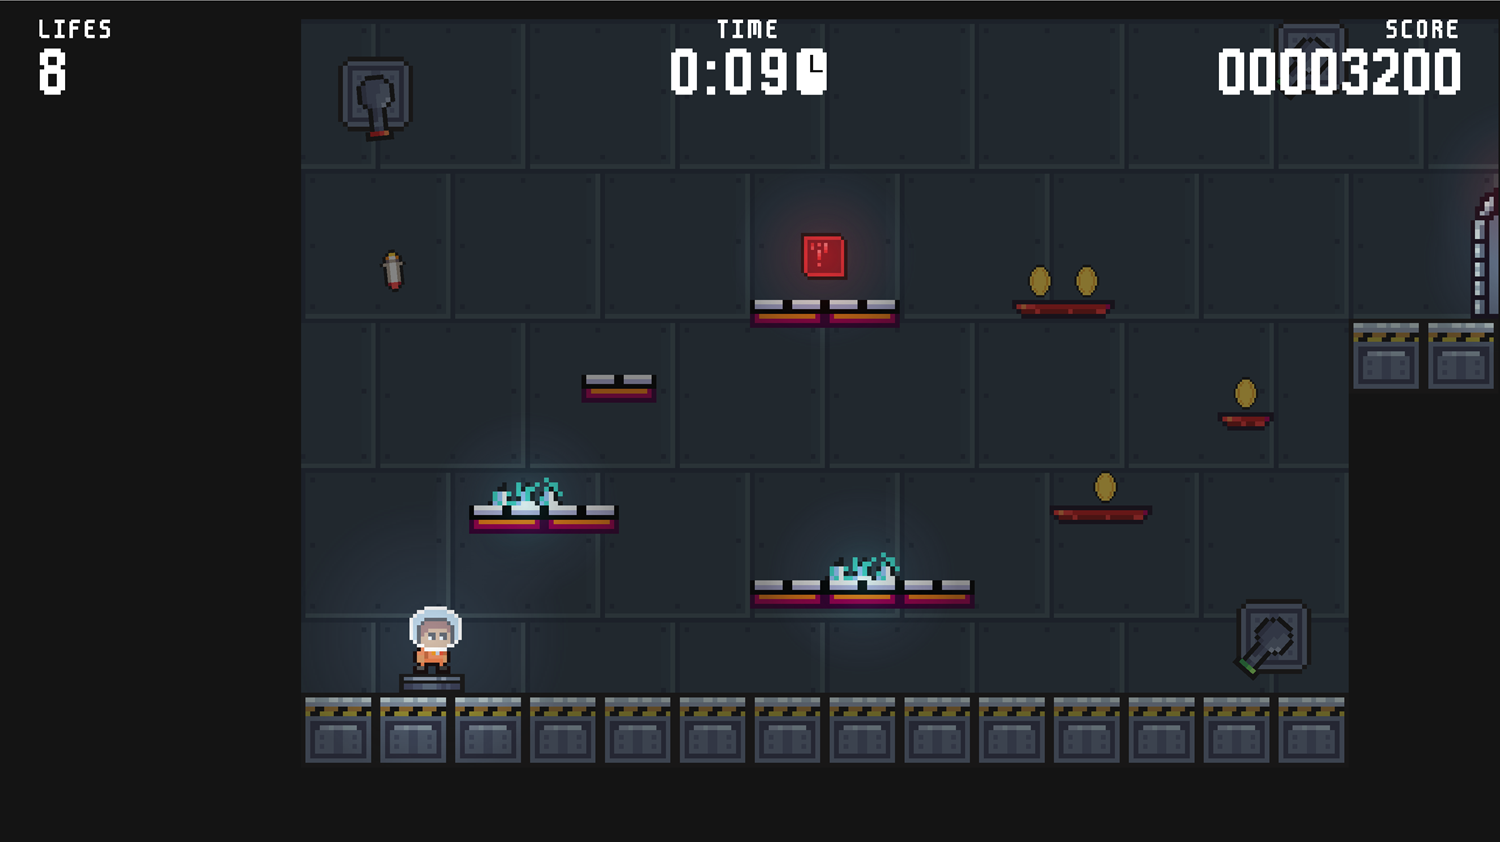 3 Minutes to Escape Game Final Level Screenshot.